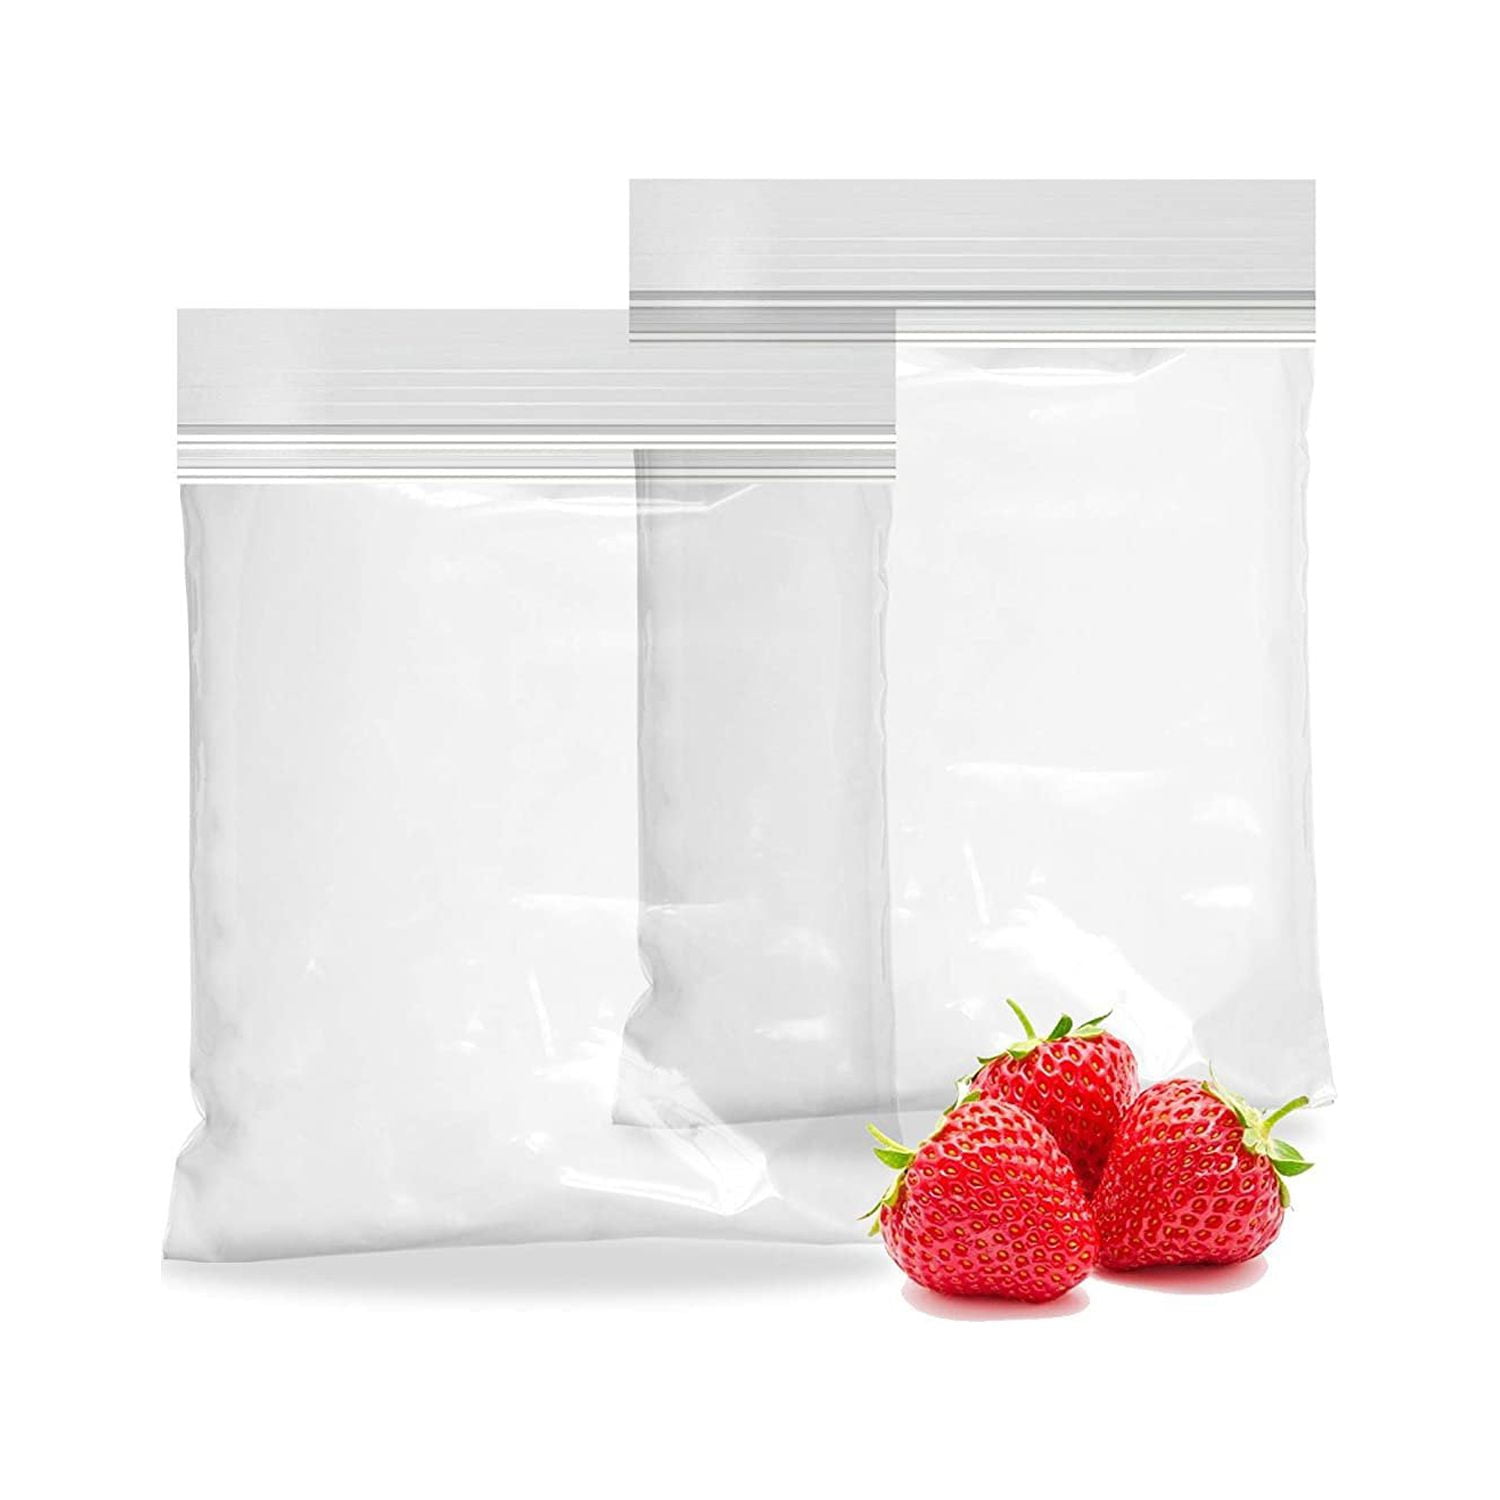 AMZ Supply Clear Zip Lock Bags 12x12 Heavy Duty Seal Top Polyethylene Bags  Thickness 6 Mil Pack of 500